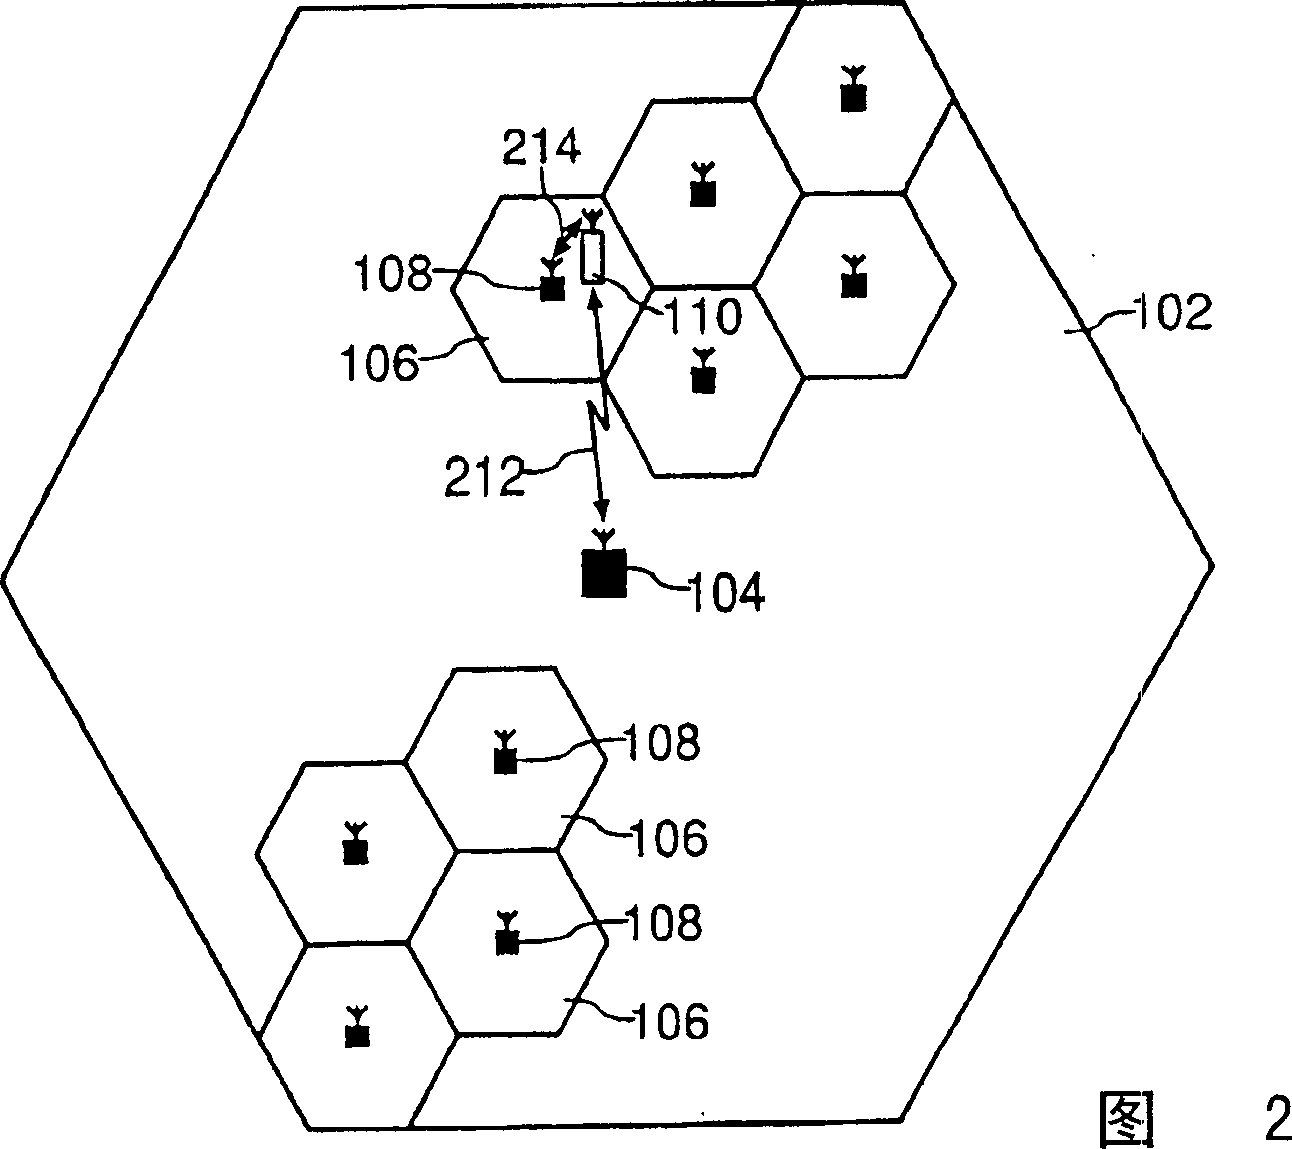 Hierarchical cellular radio communication system